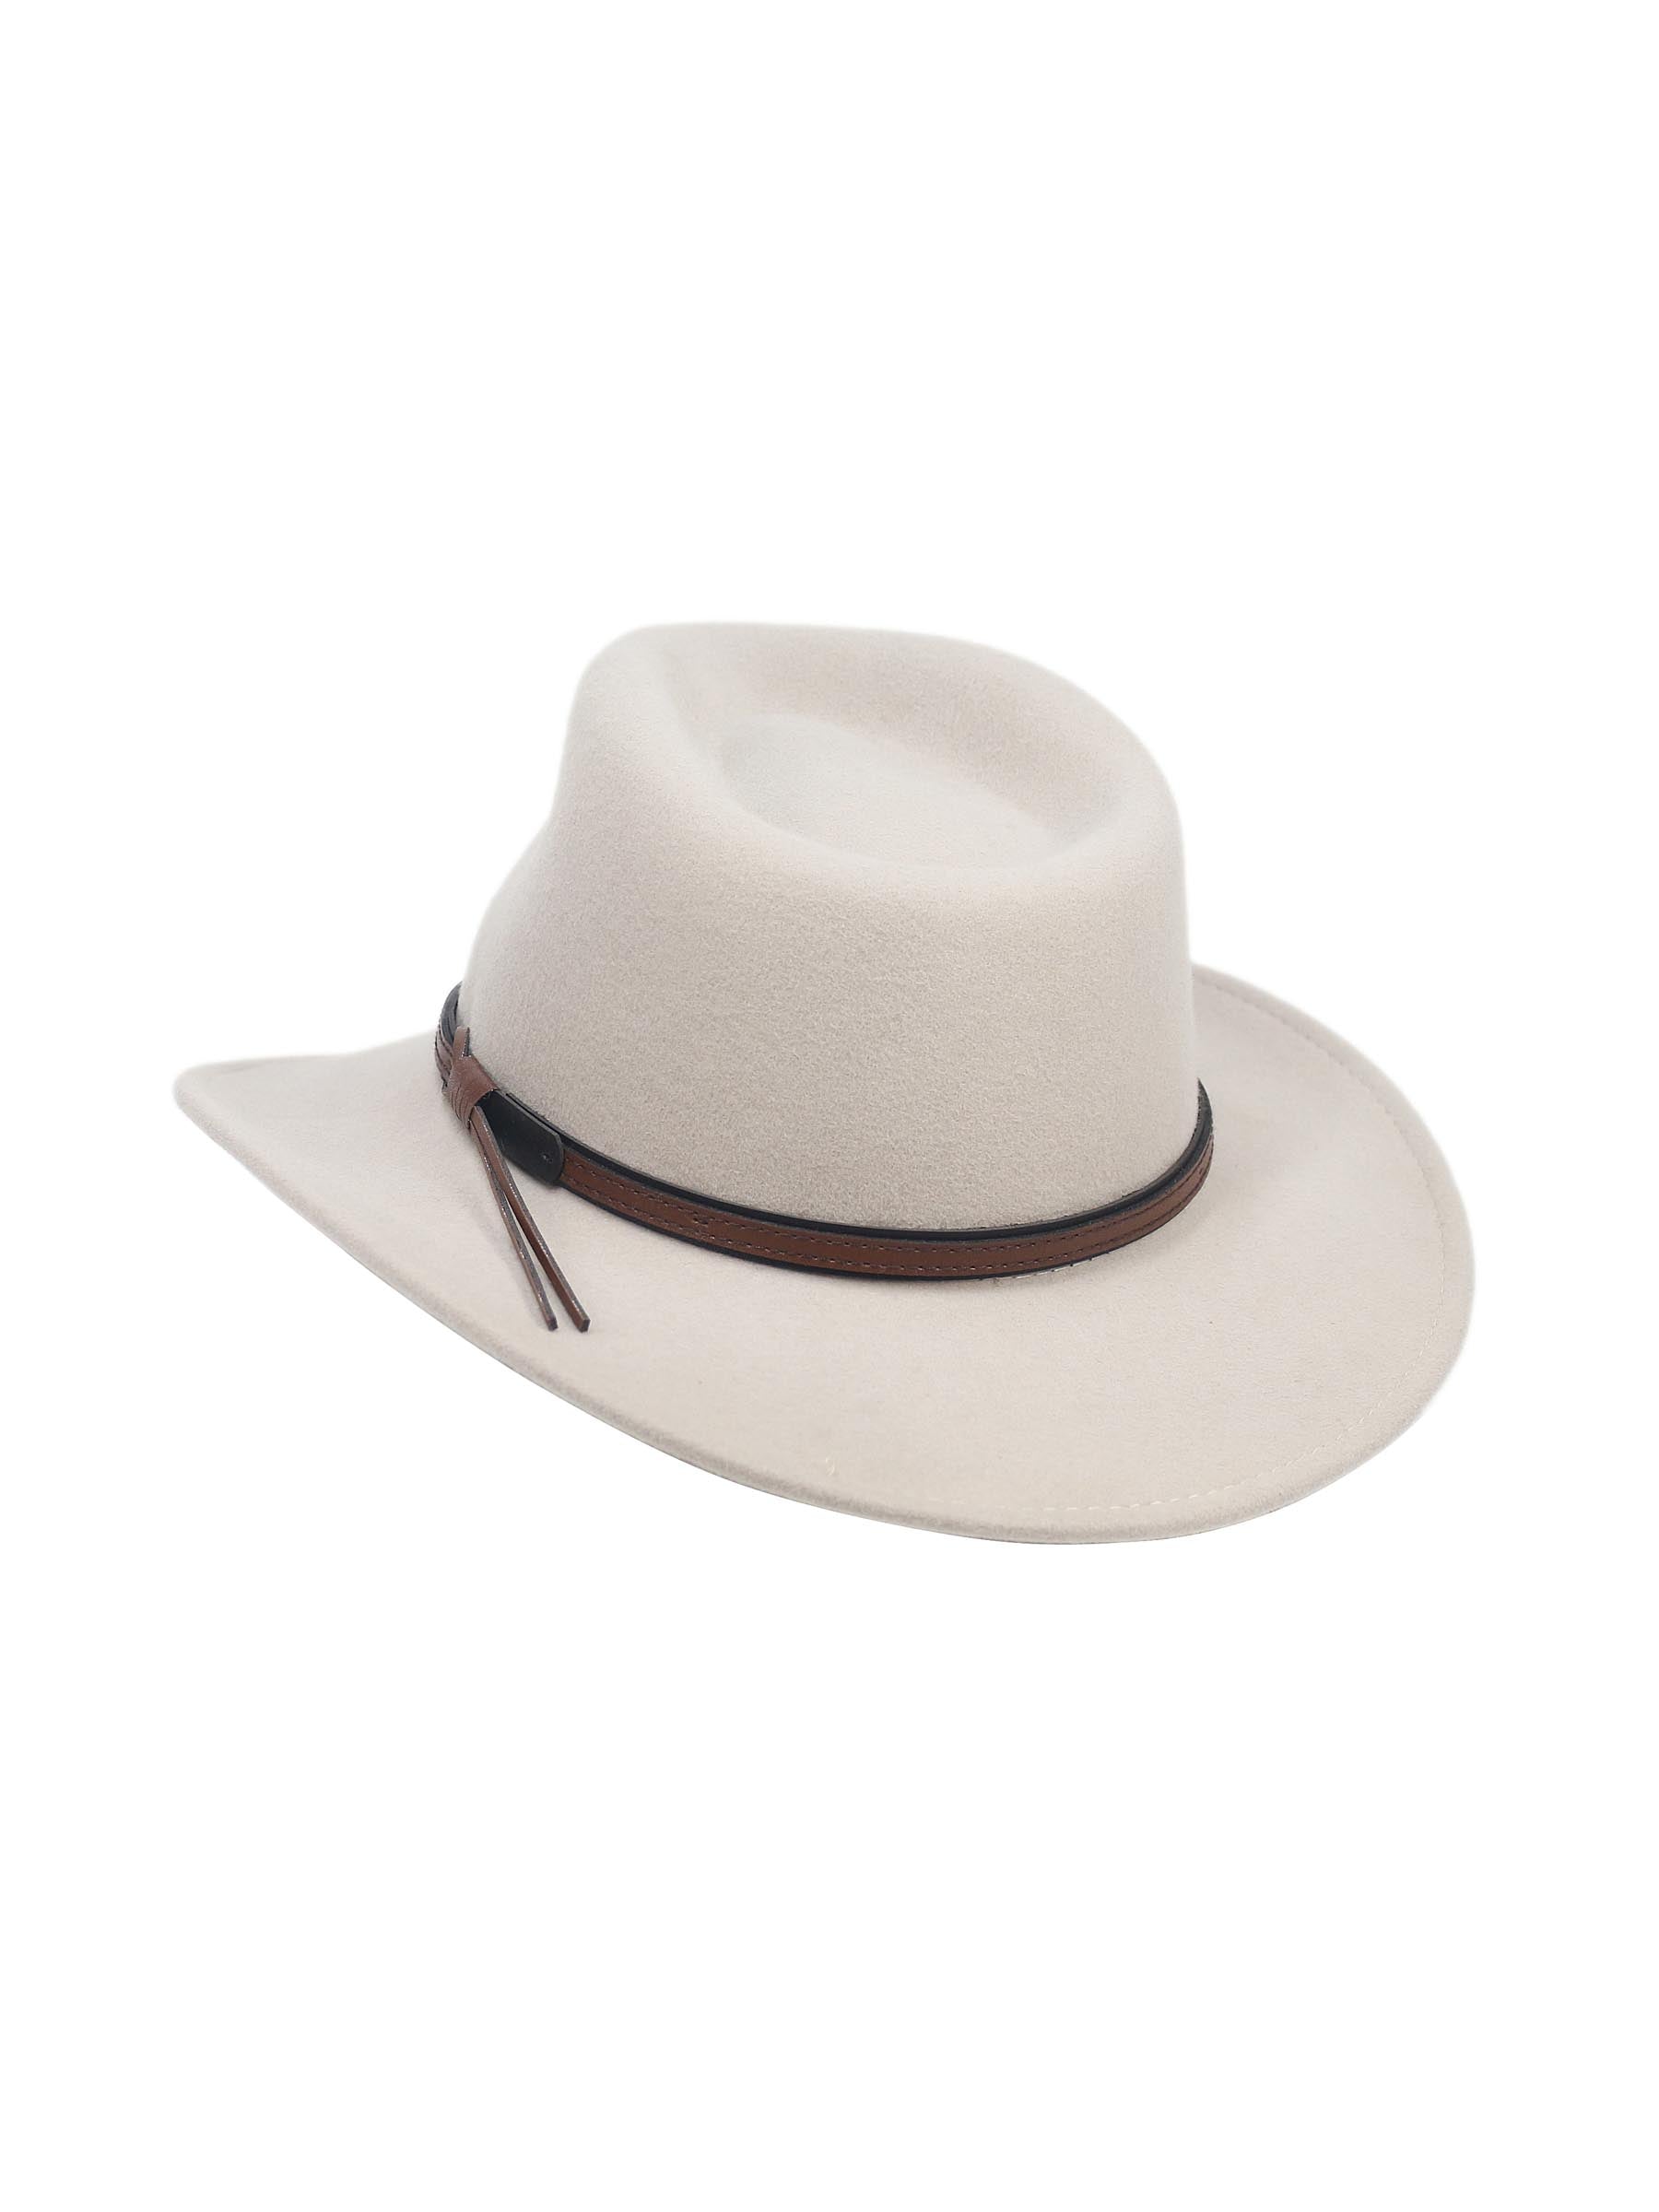 Silver Canyon Men&#39;s Denver Crushable Wool Felt Western Style Cowboy Hat - Silver Belly